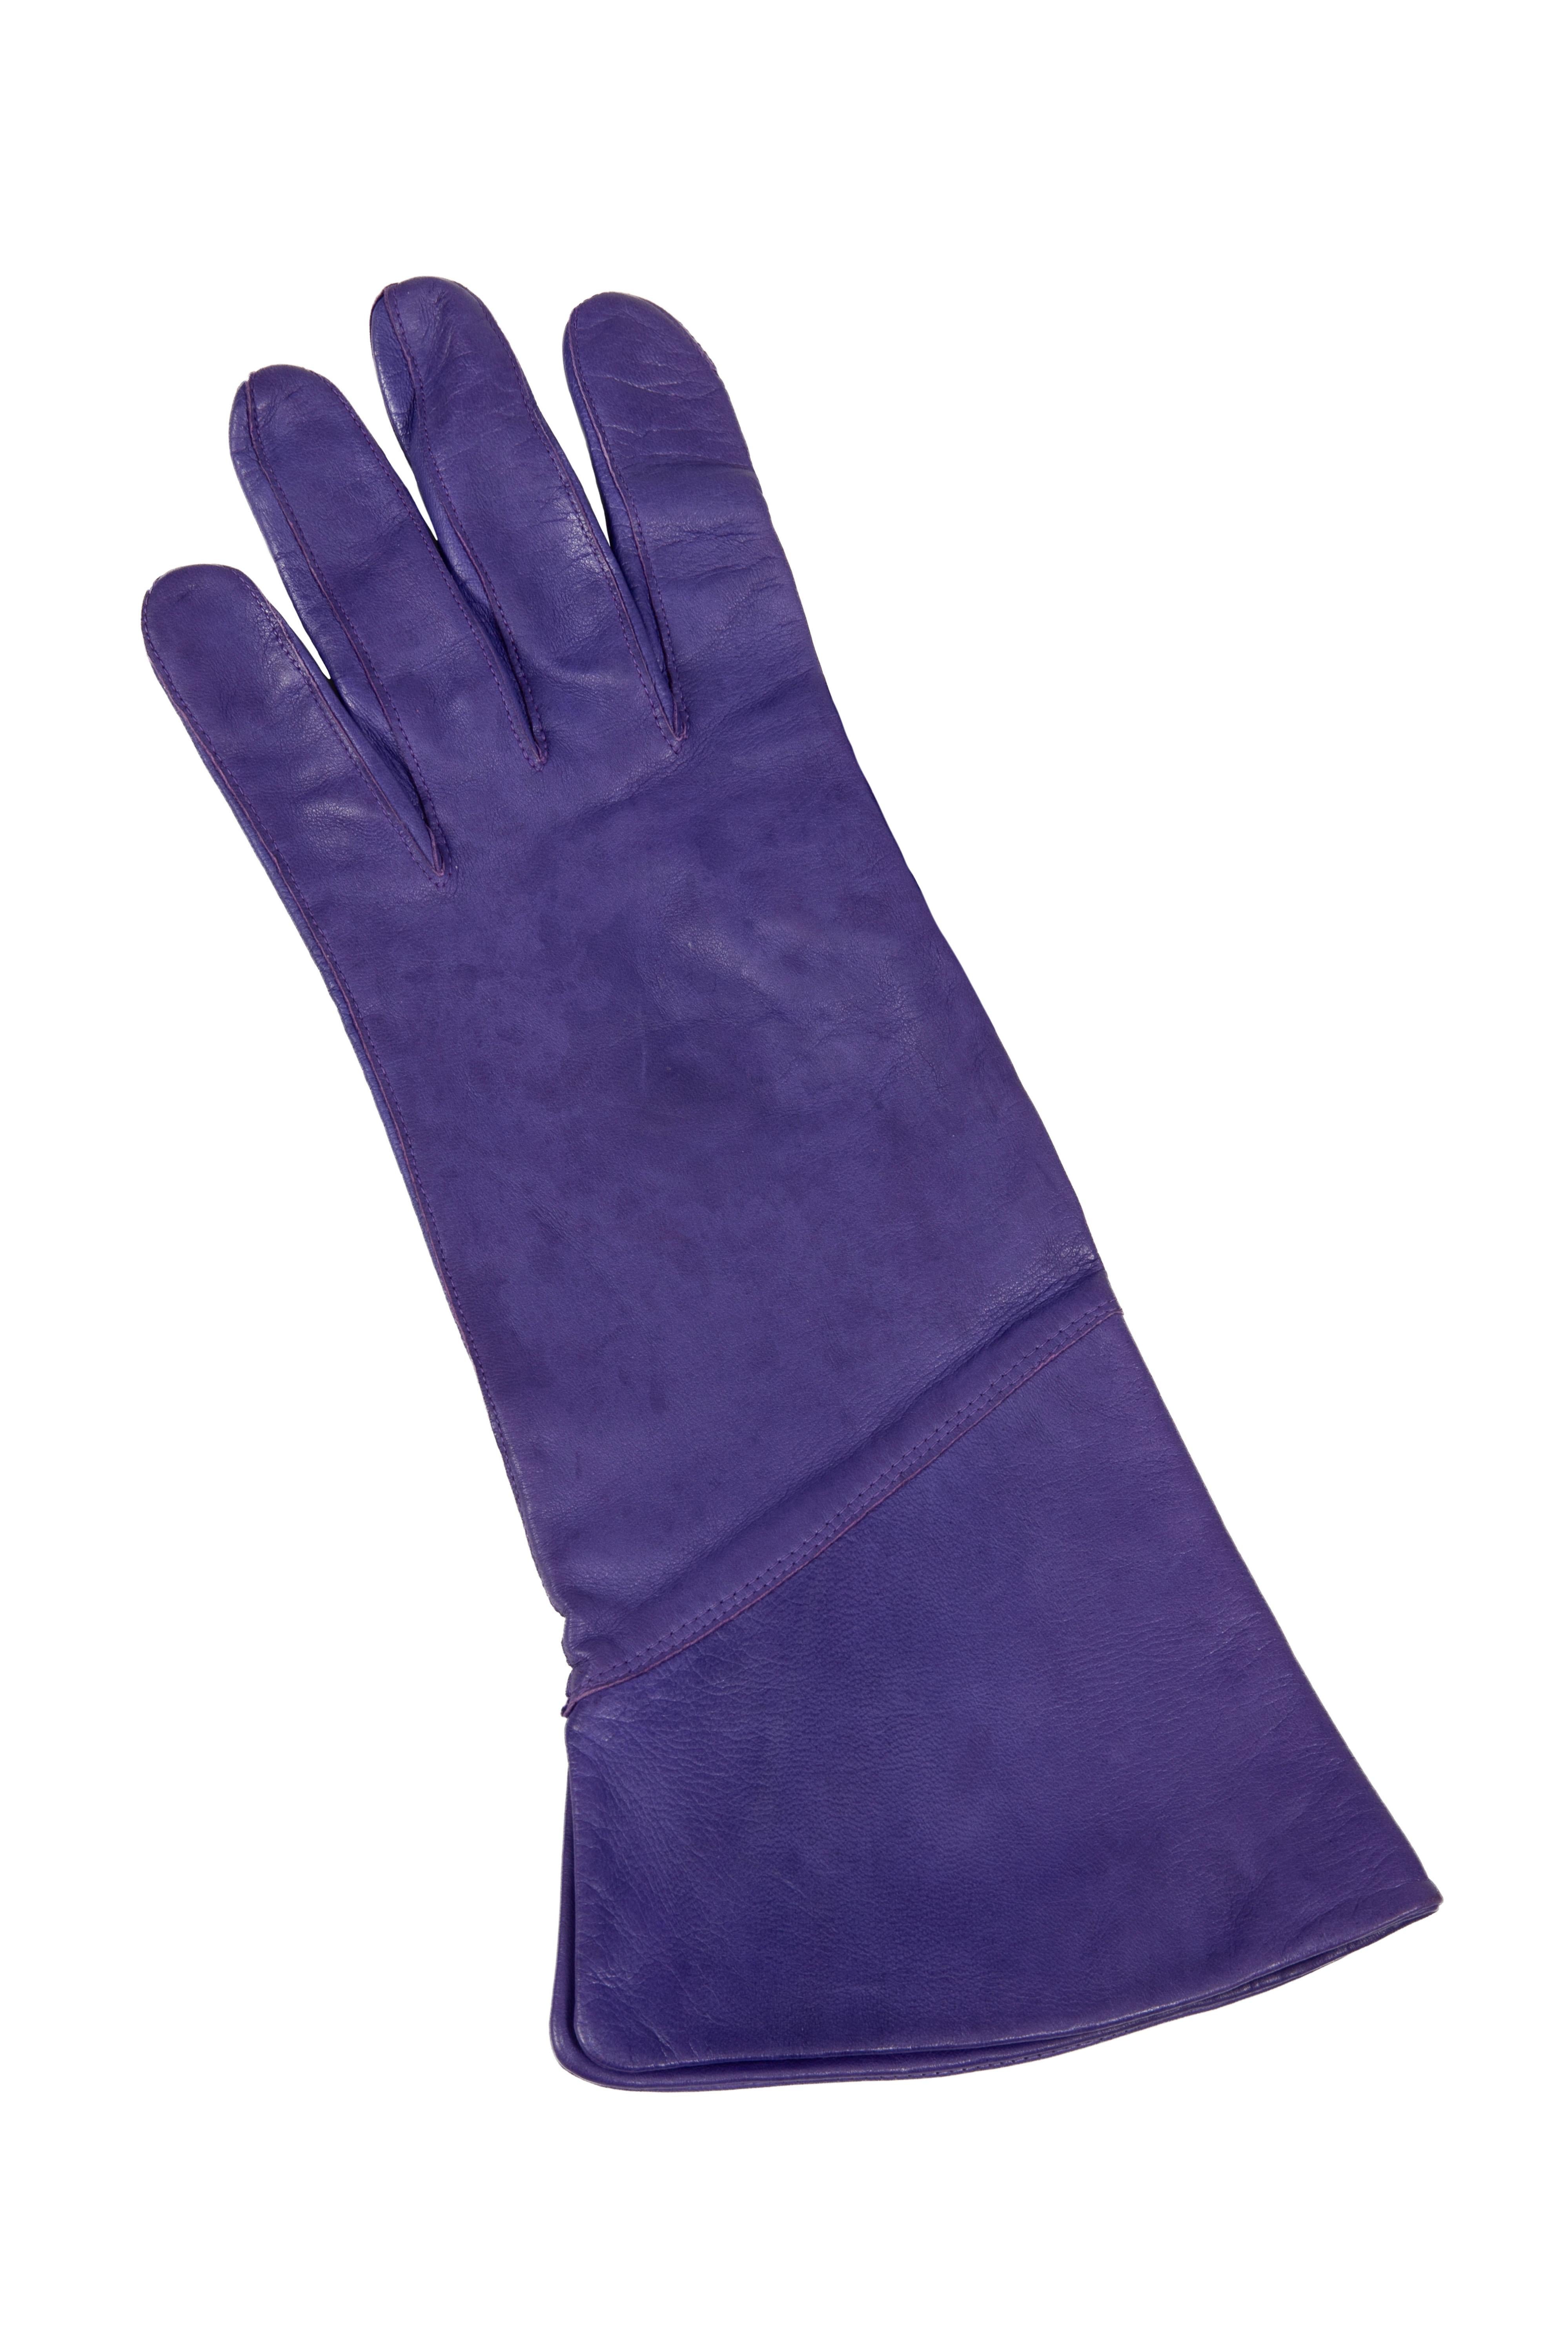 Roeckl Munich Purple Nappa Leather Gauntlet-Style Gloves with Flared Cuffs For Sale 1